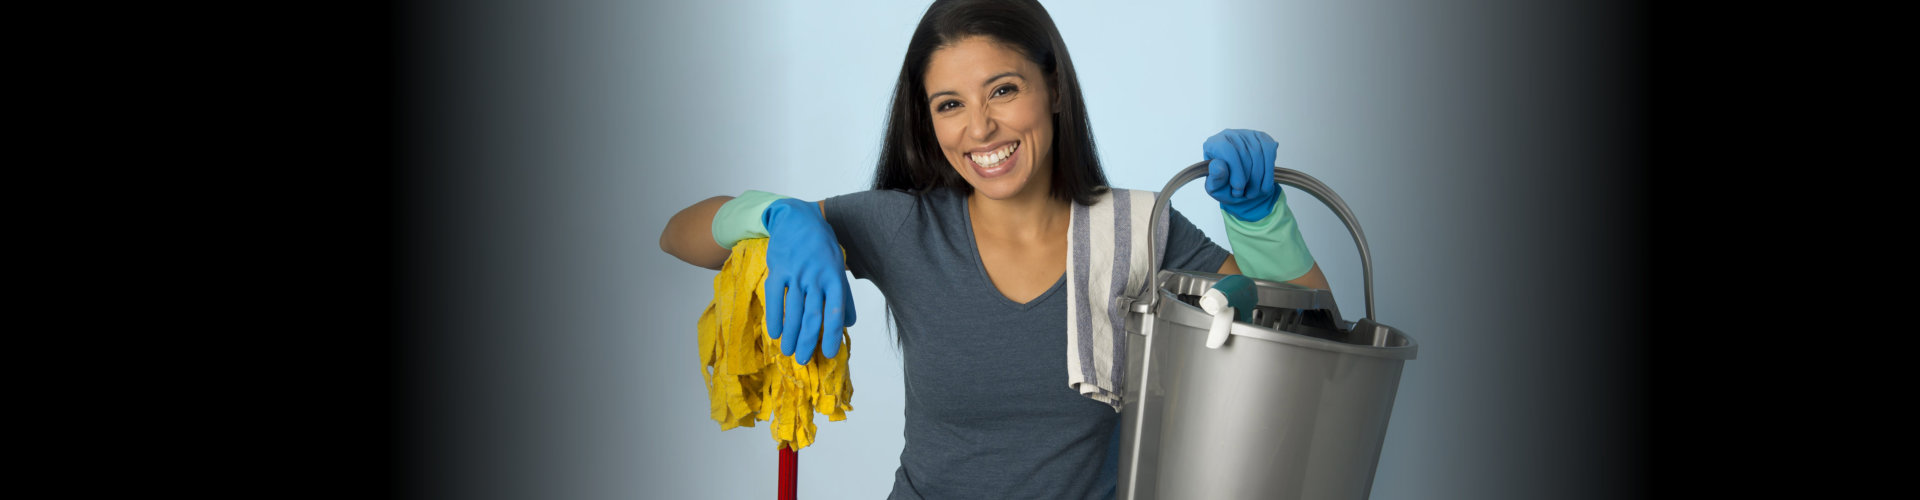 woman holding a cleaning tools